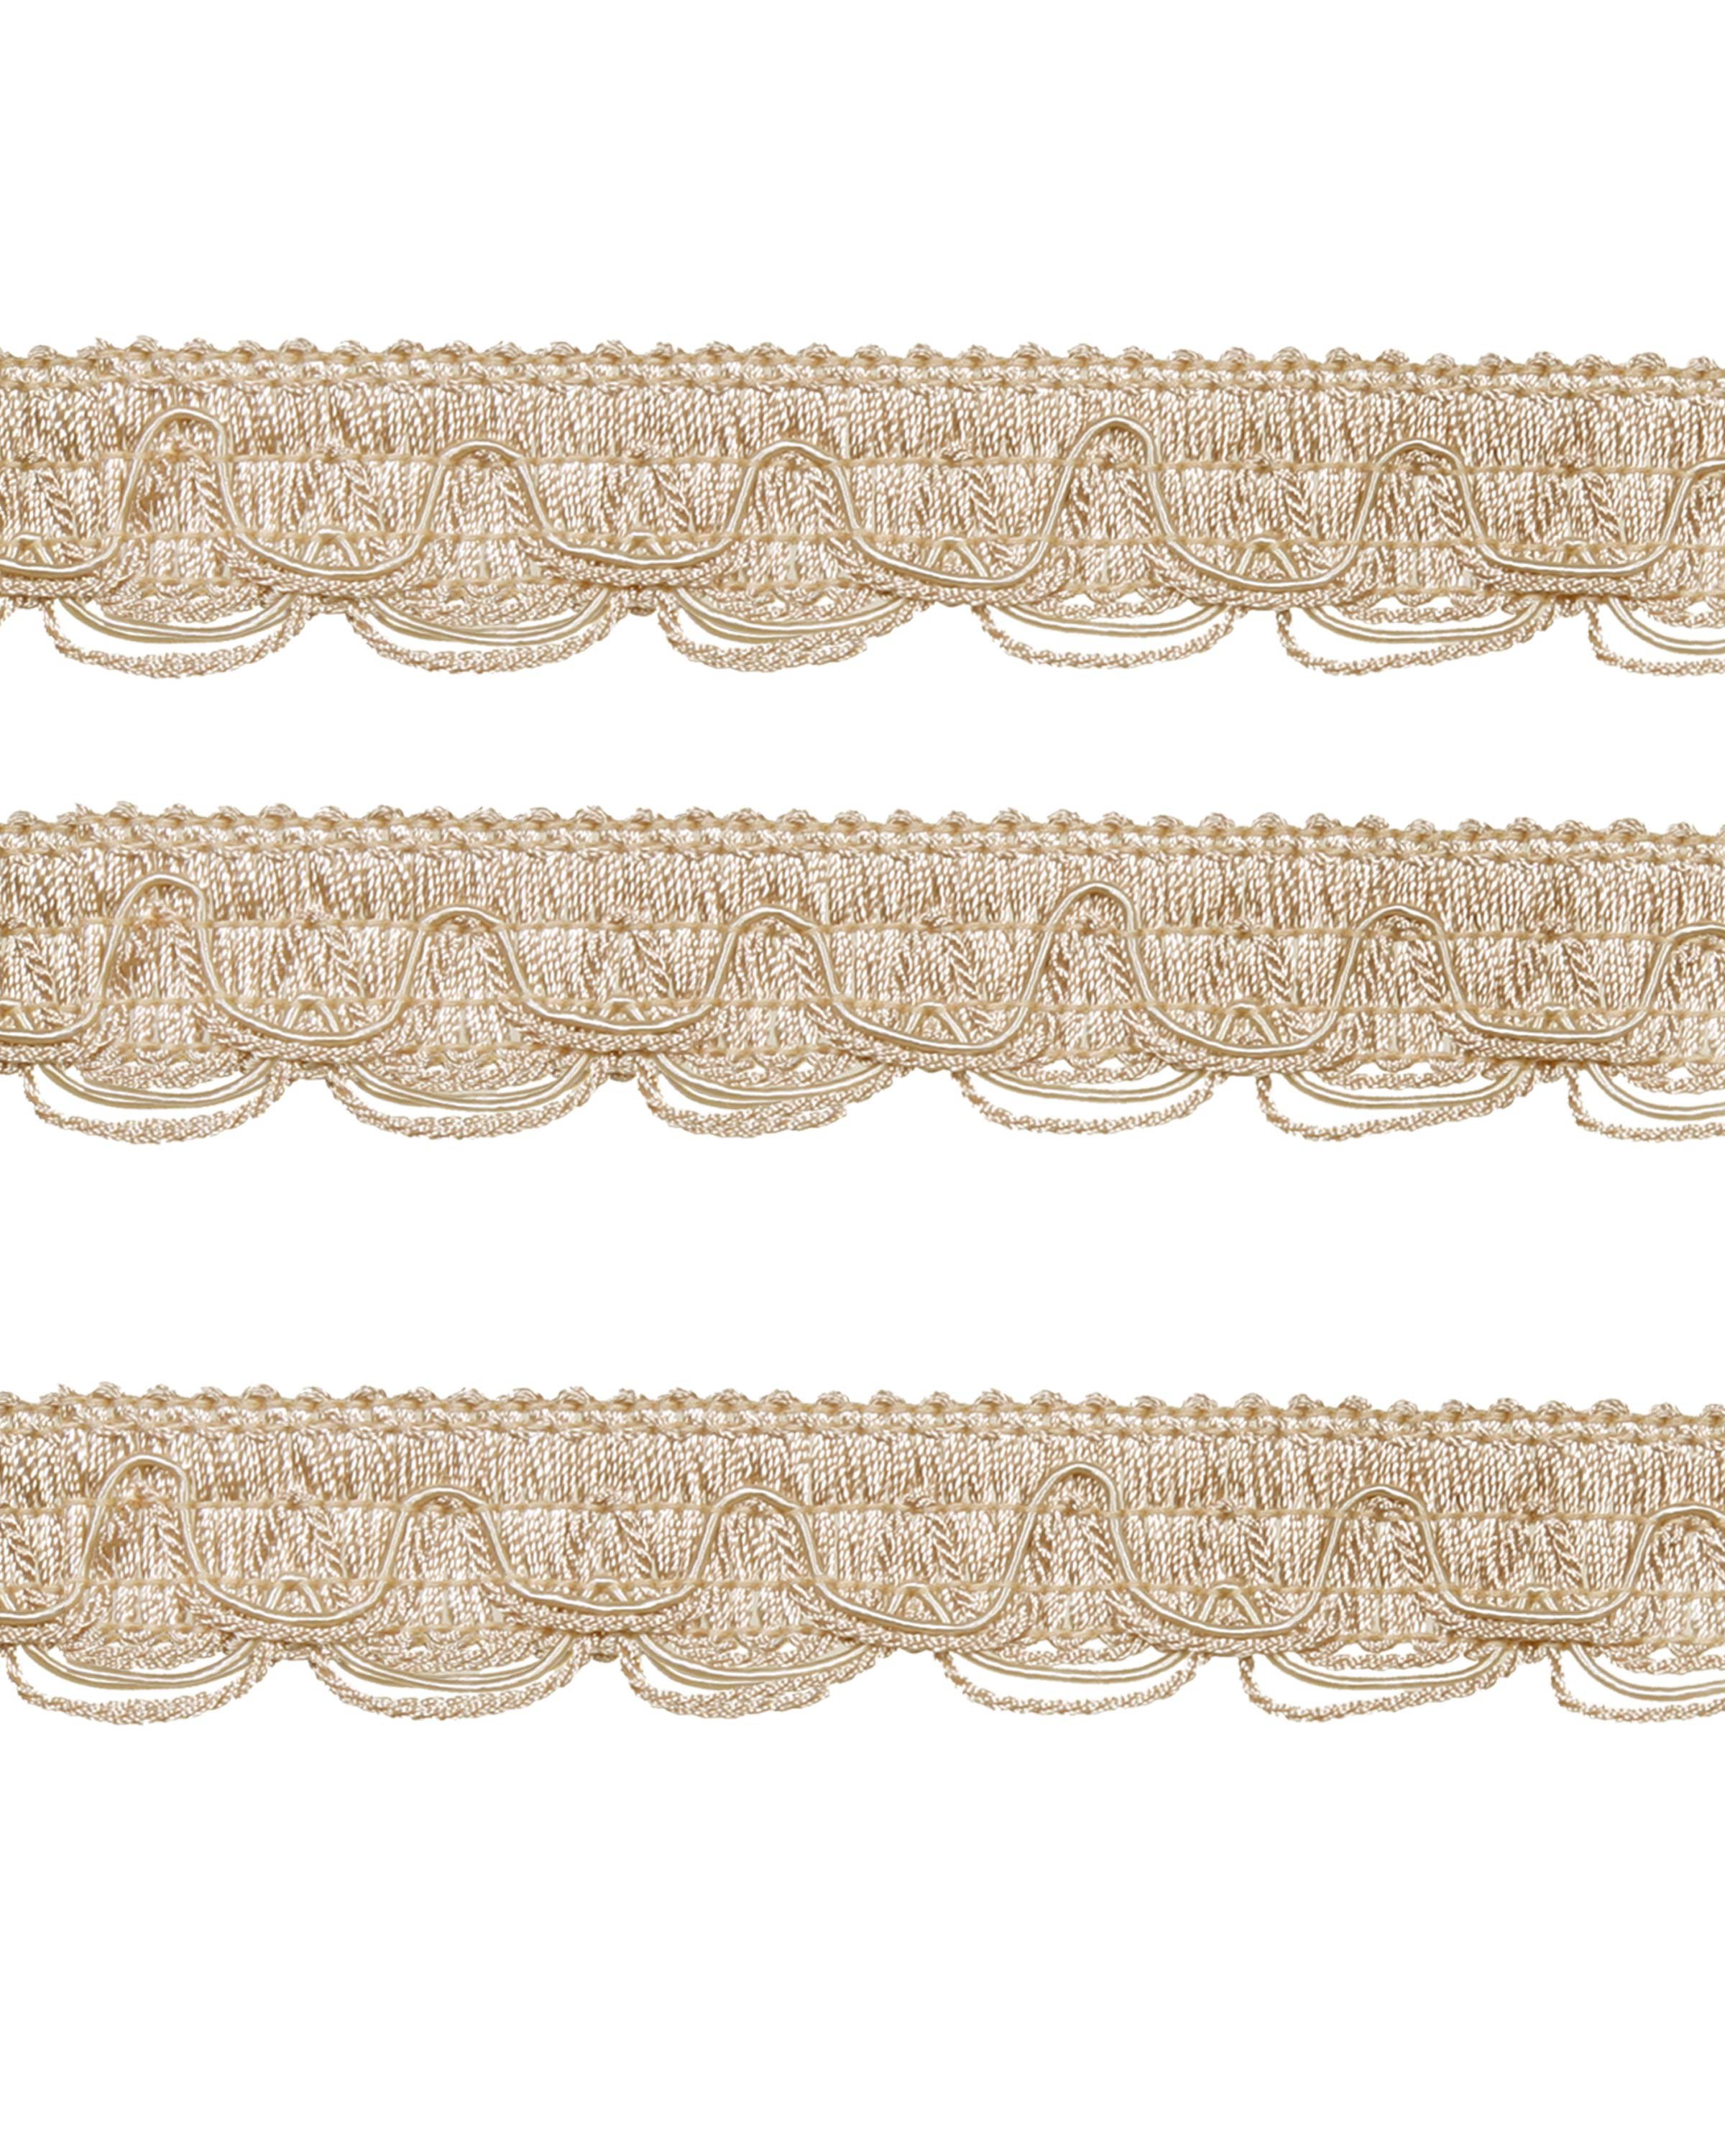 Scalloped Looped Braid - Cream / Gold 28mm Price is for 5 metres